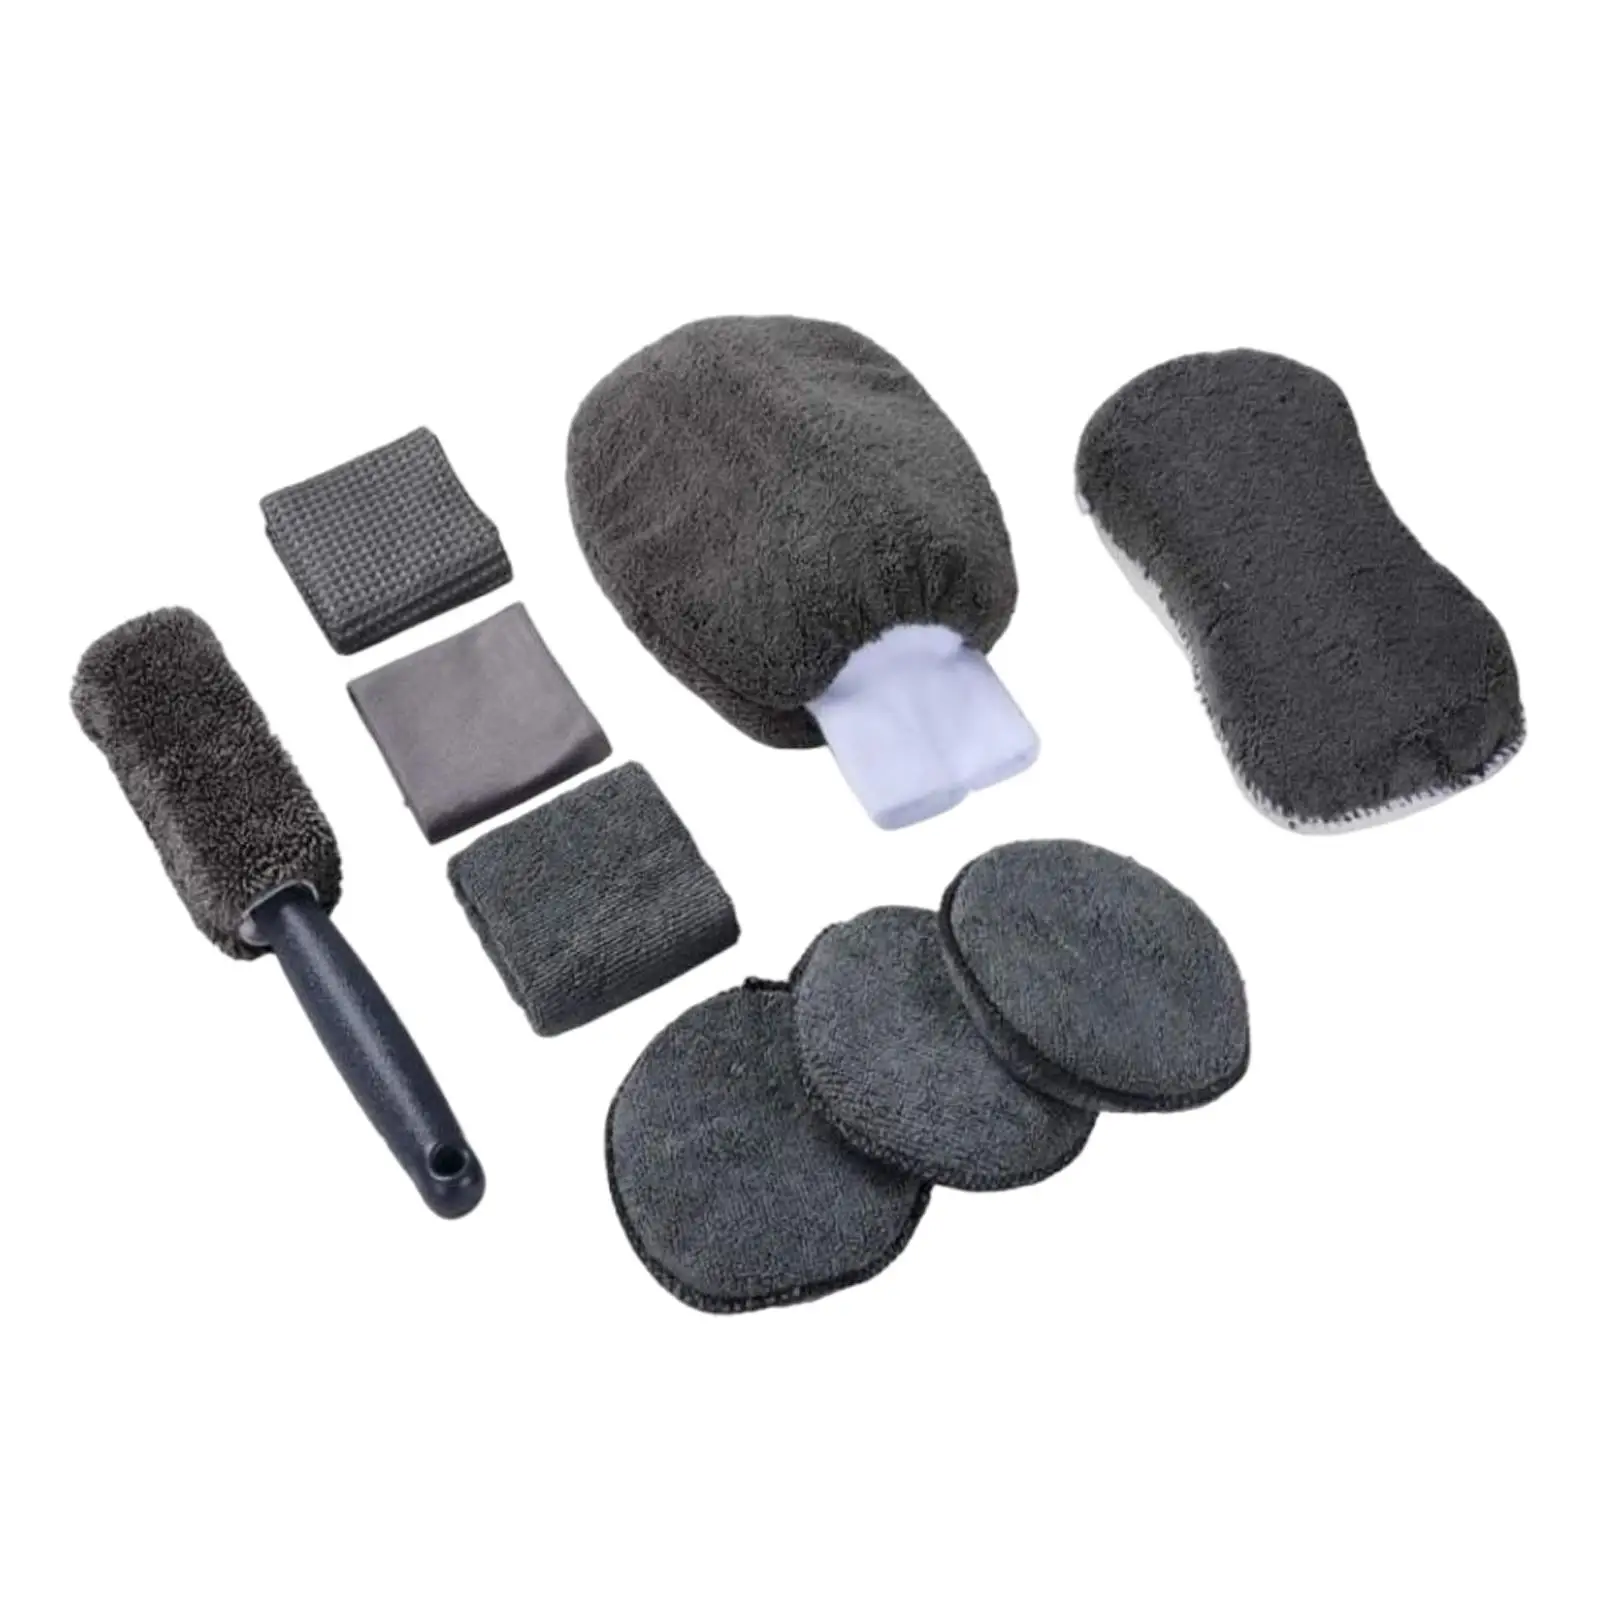 9Pieces Car Wash Cleaning Tools Kit for Cleaning Wheels Windshield